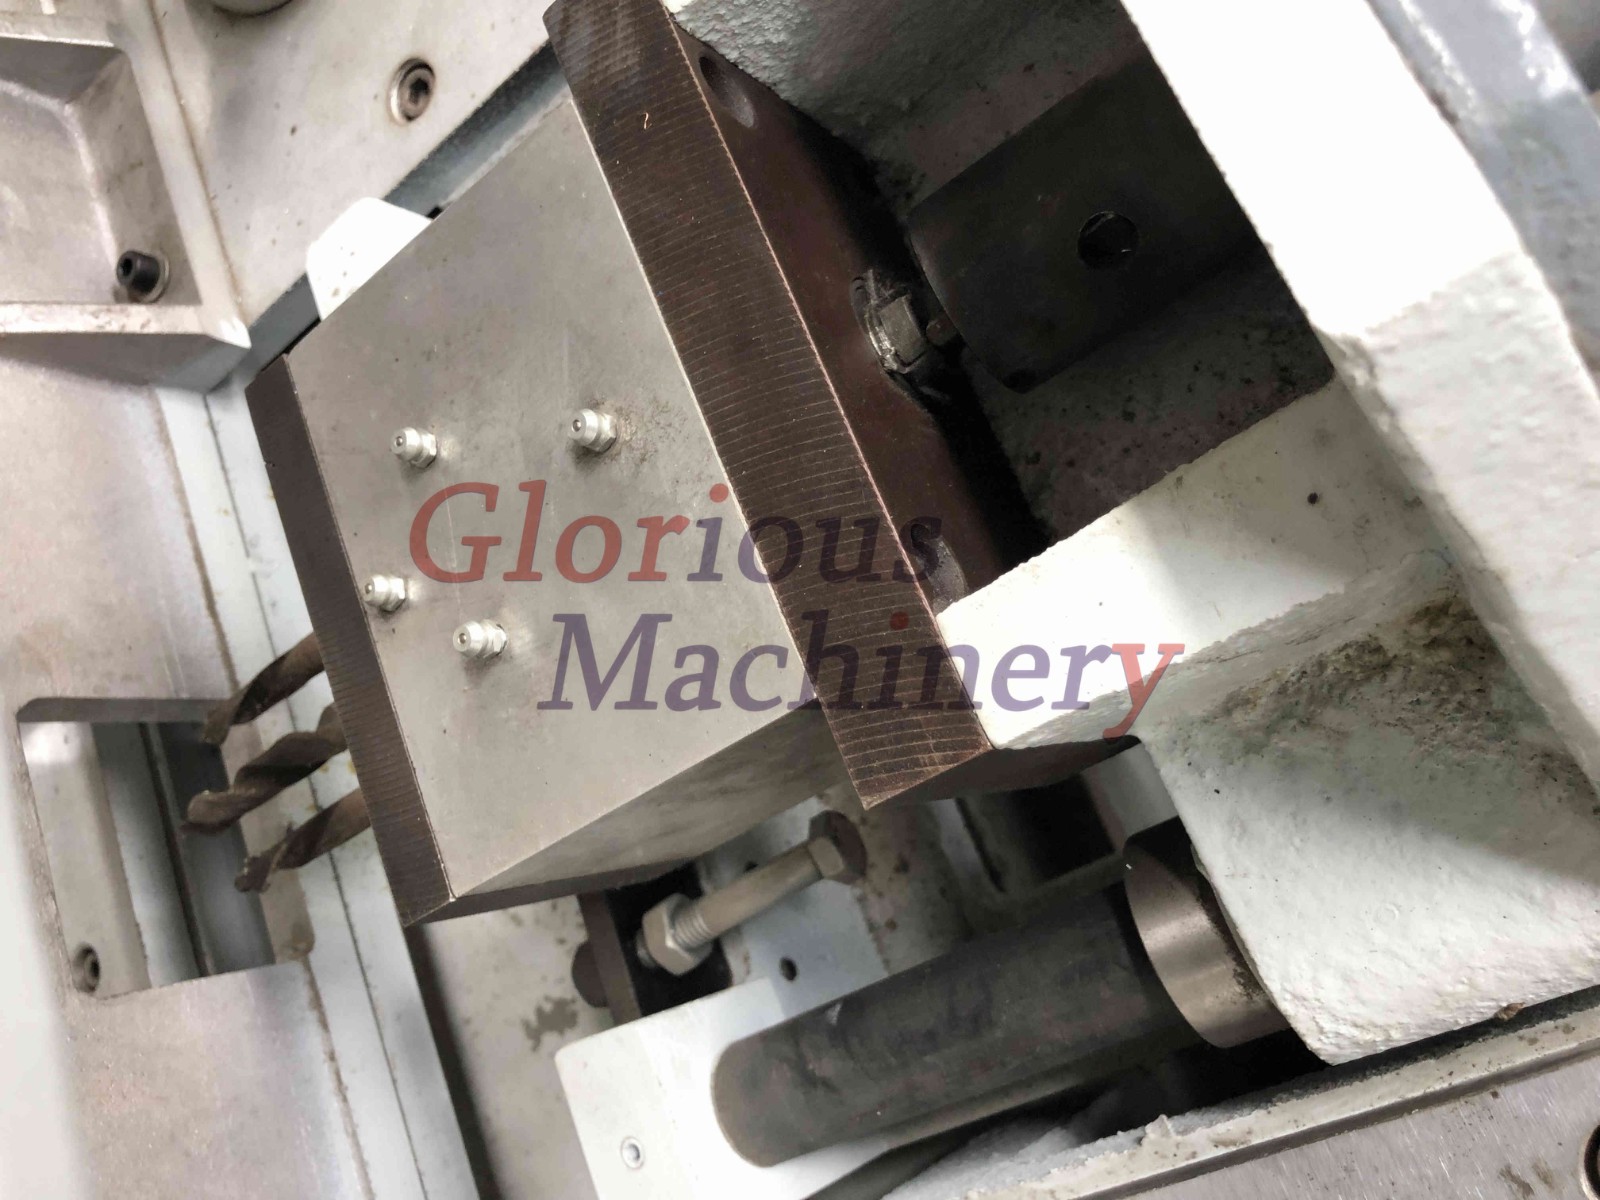 copy router dillng machine